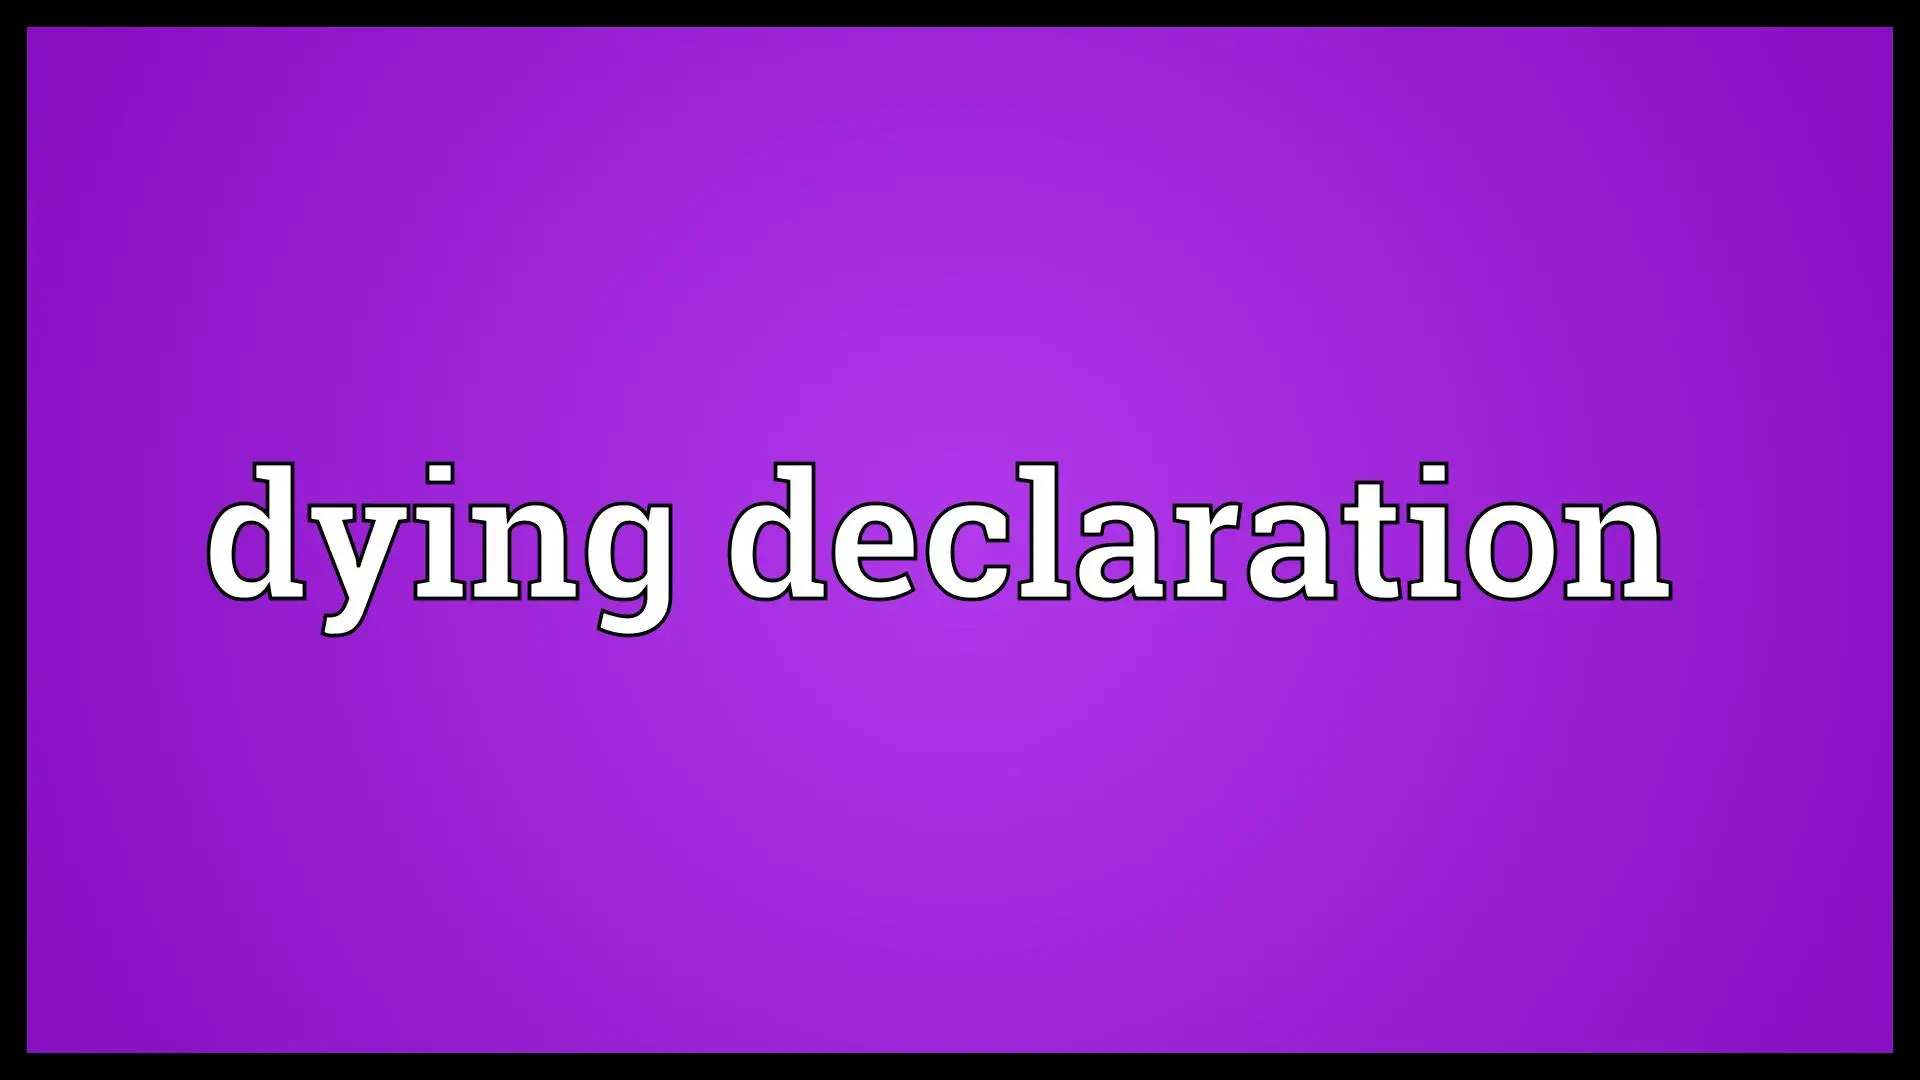 Declare meaning. Underestimation.